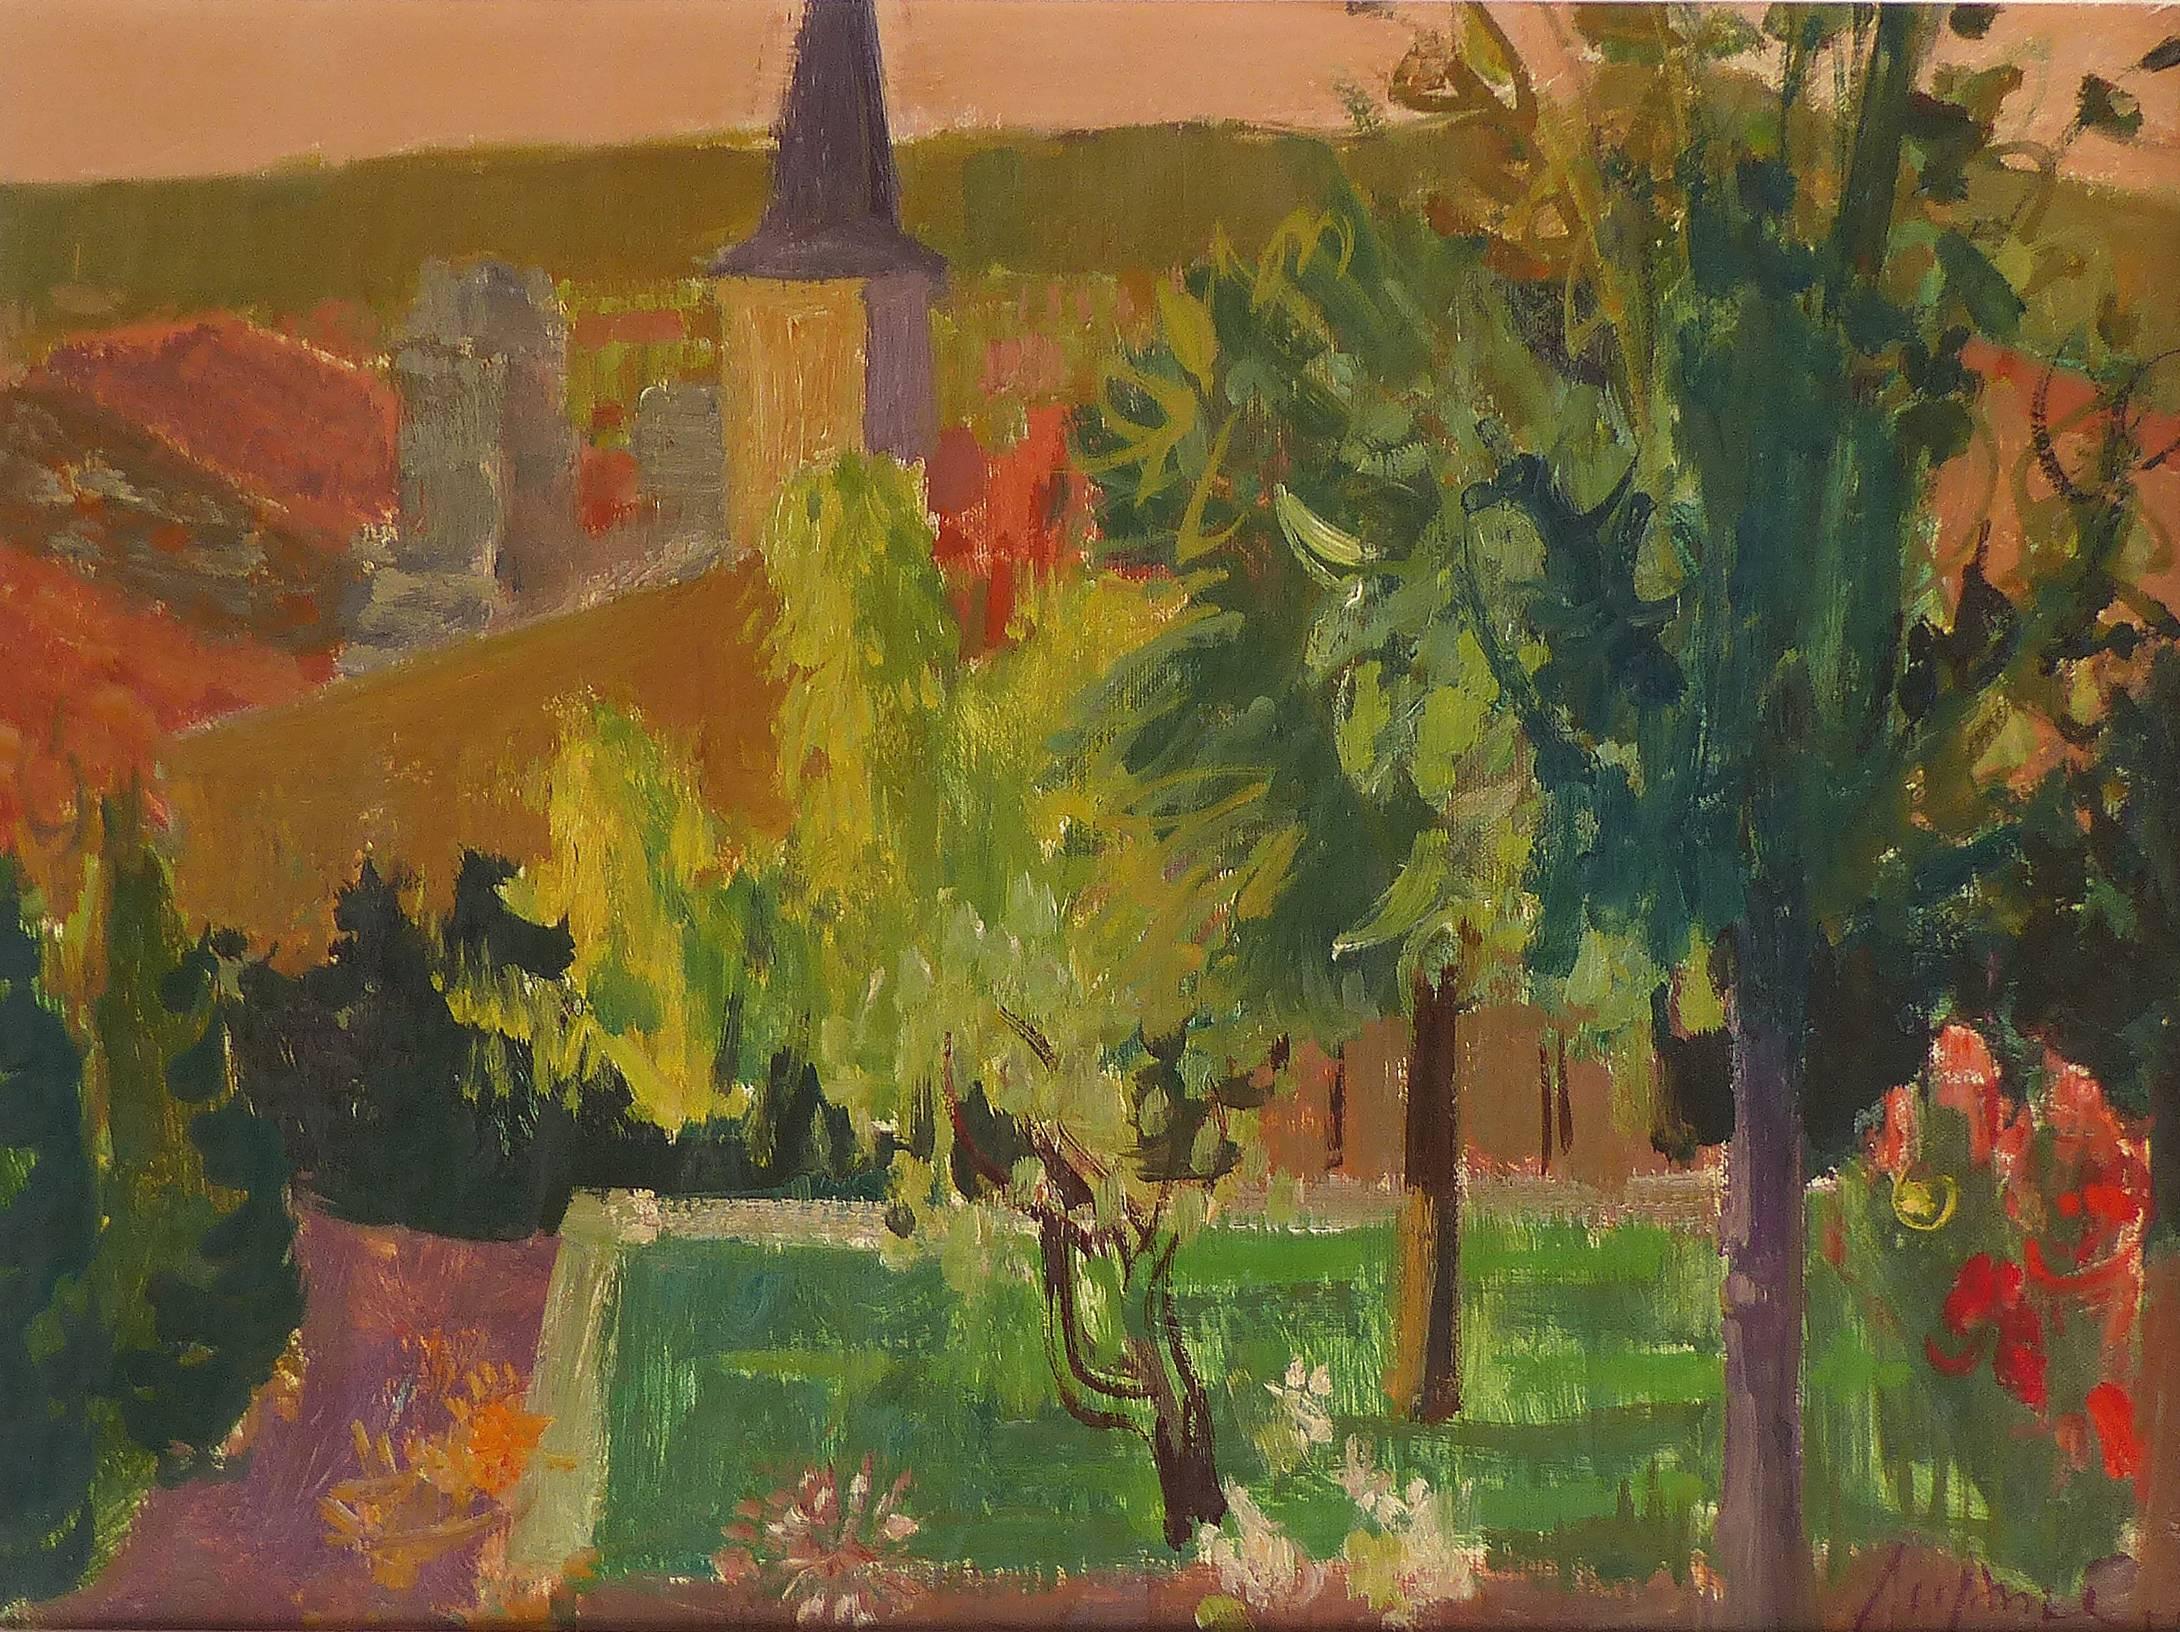 Jean Claude Aujame 1959 French Countryside Landscape Oil Painting 

Offered for sale is a landscape painting by the French artist Jean Claude Aujame created in 1959. The artist used a palette of clean and bright color with the subtle brushwork of